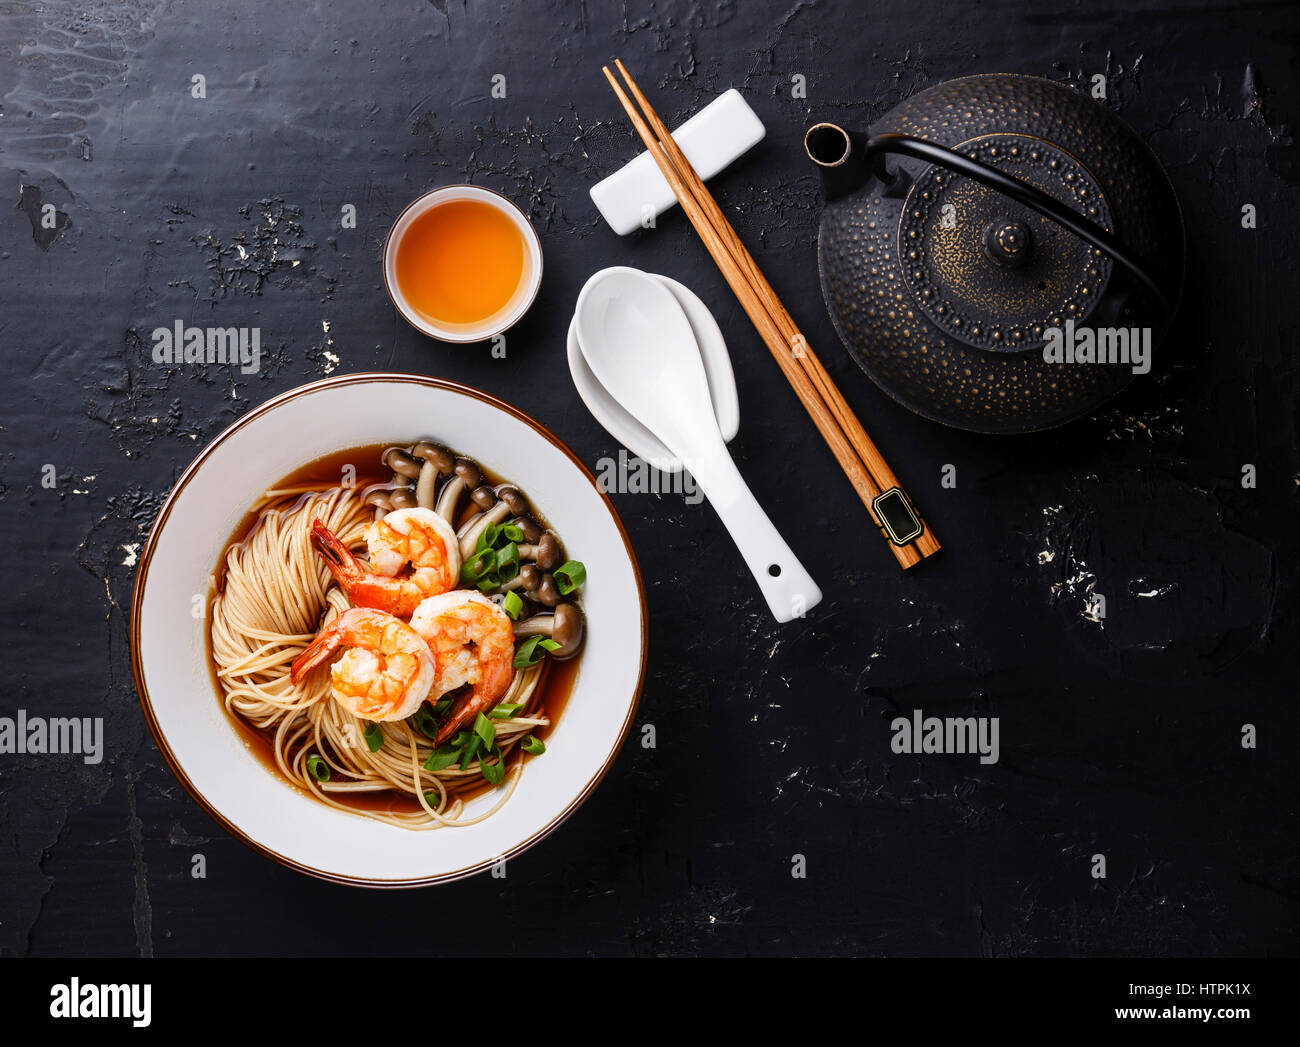 Asian Ramen noodles with broth in bowl serving size and Tea on dark background Stock Photo